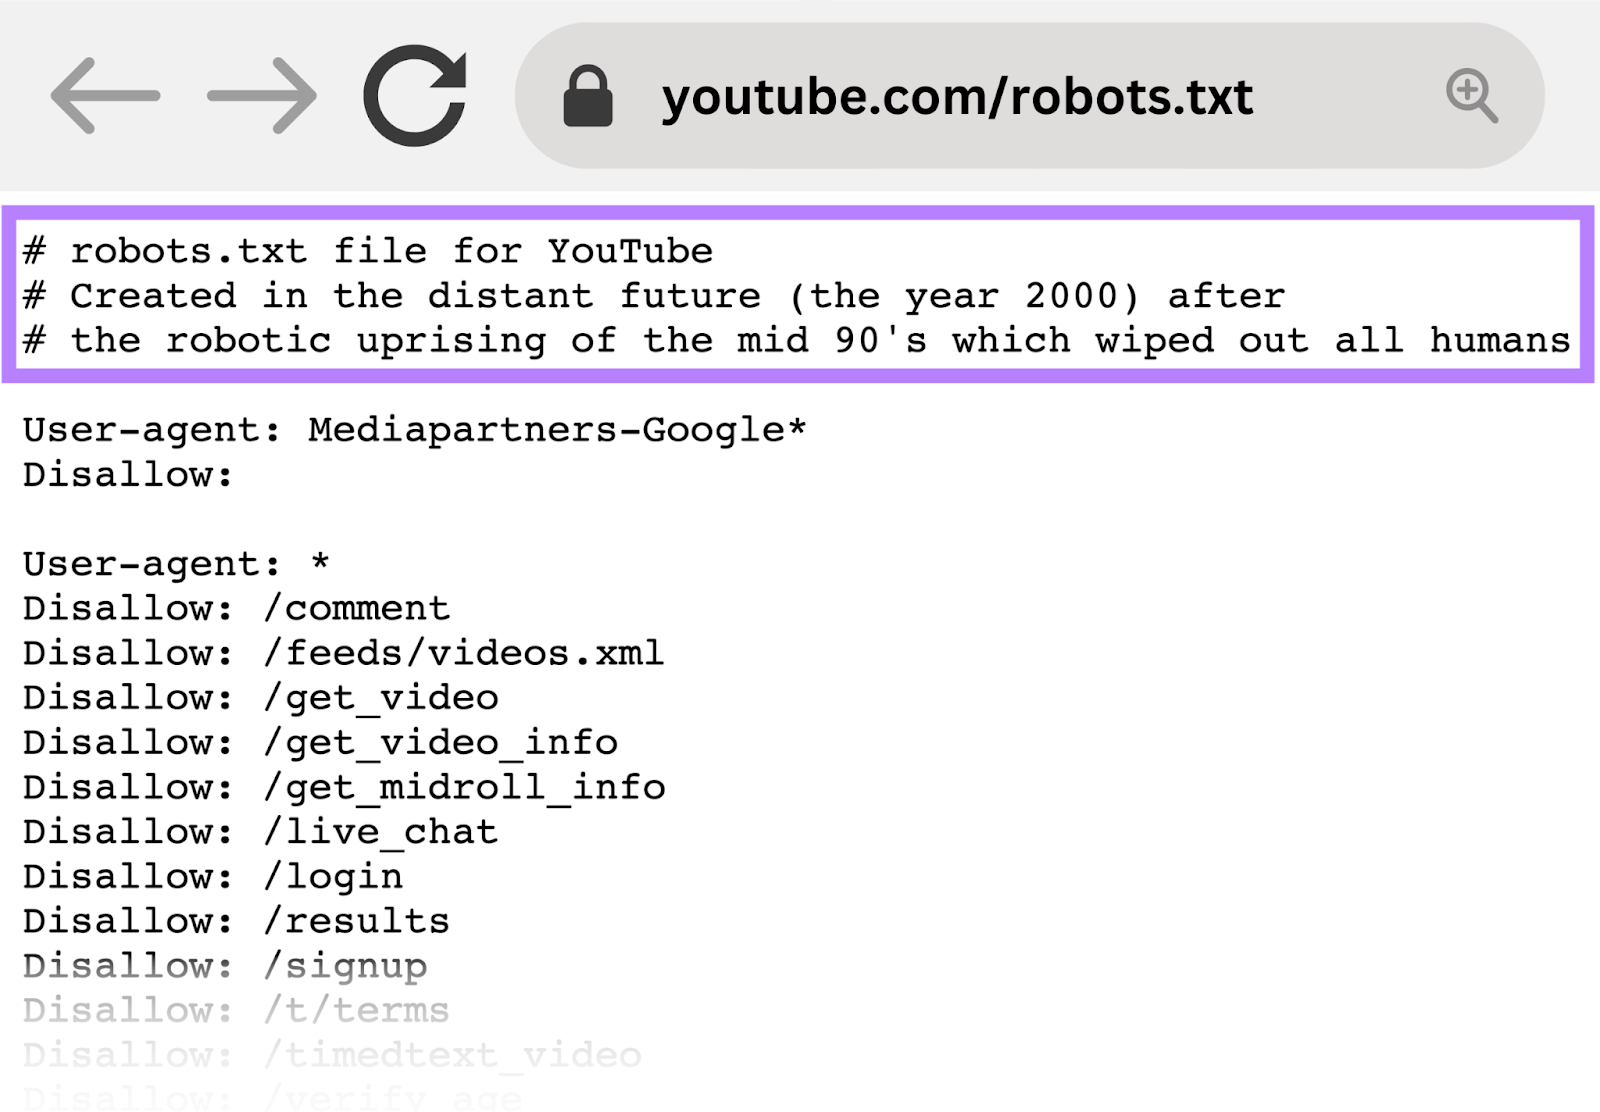 YouTube’s robots.txt file example